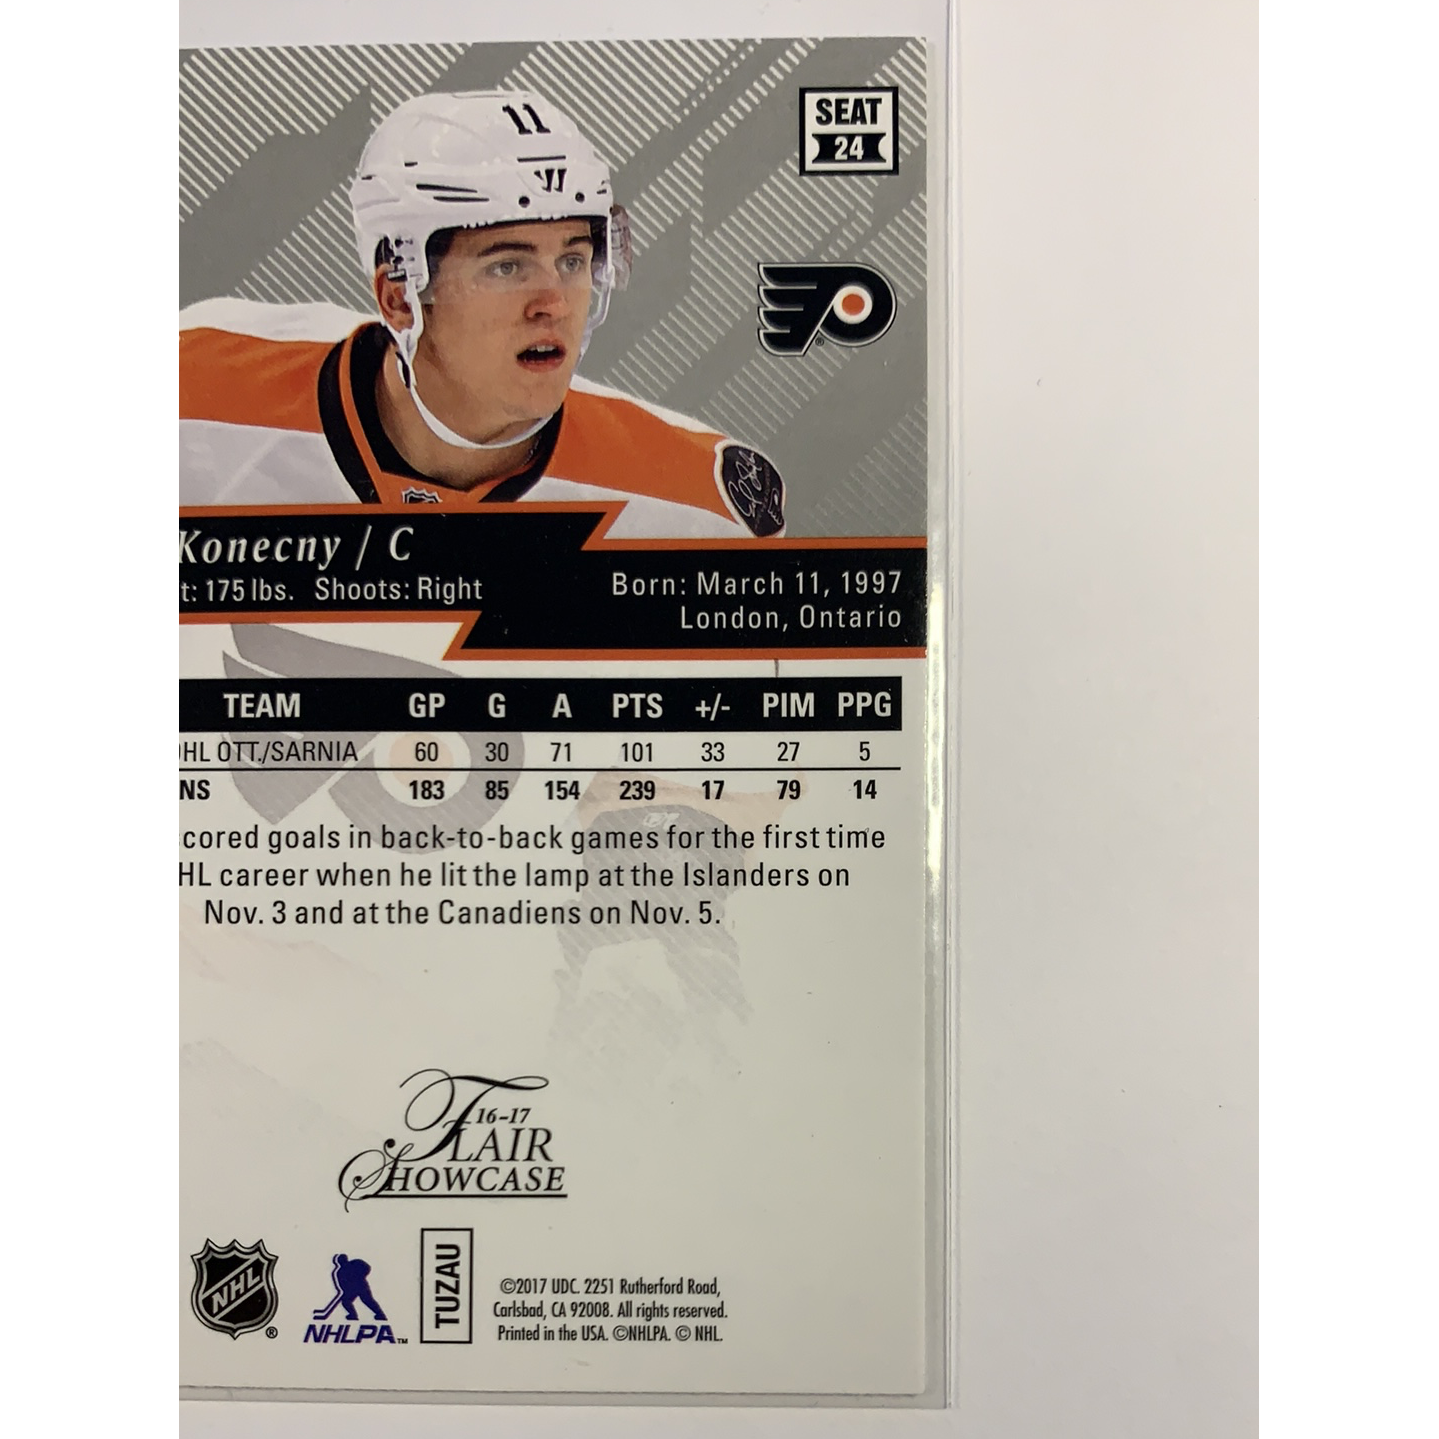  2016-17 Fleer Flair Showcase Travis Konecny Rookie Card  Local Legends Cards & Collectibles